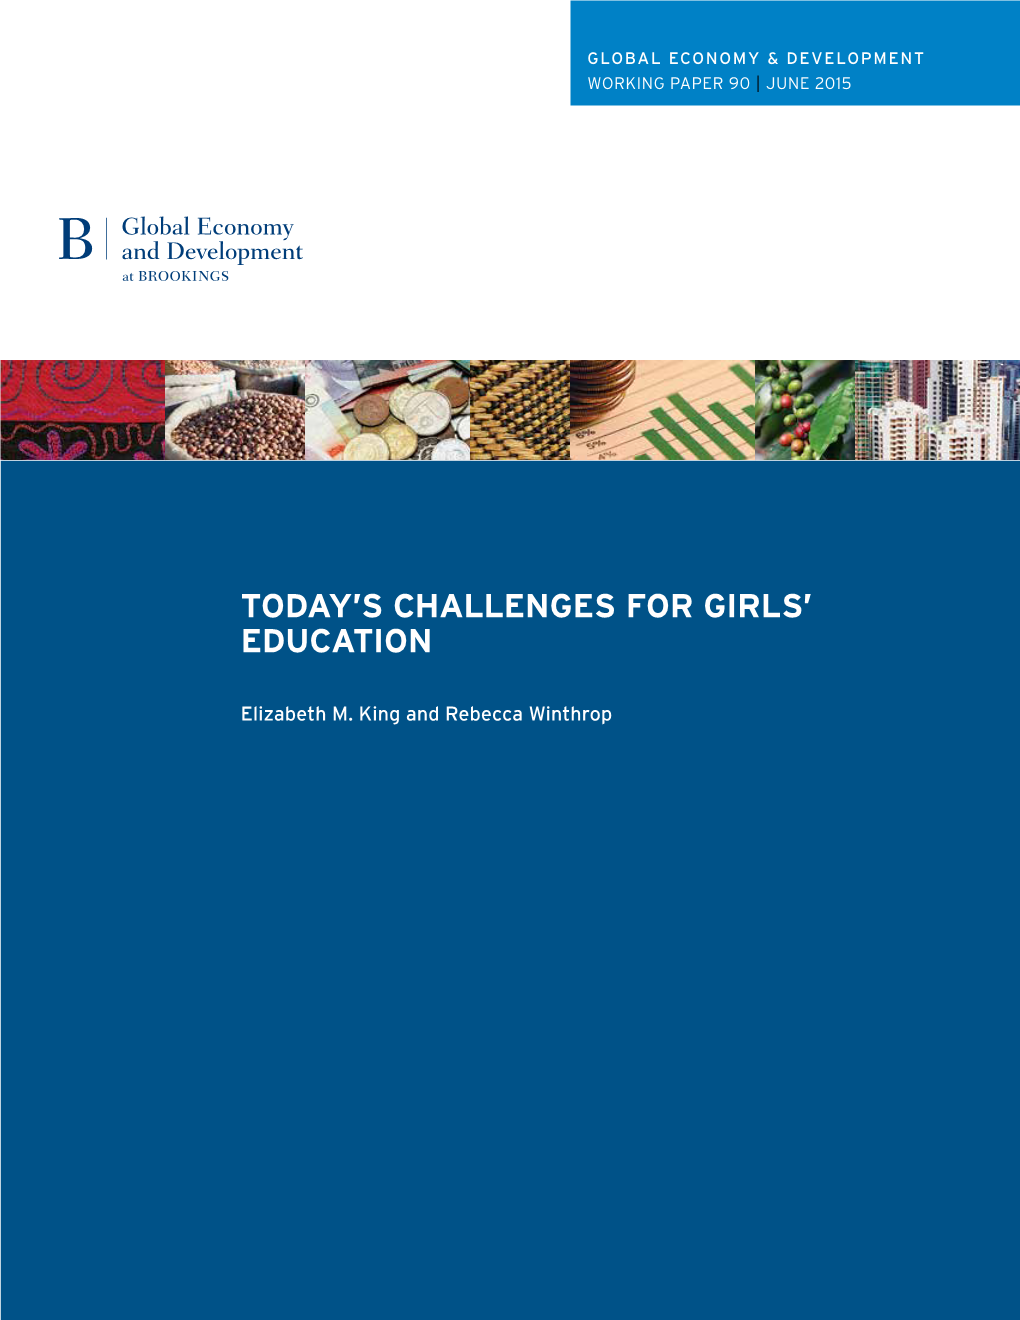 Today's Challenges for Girls' Education